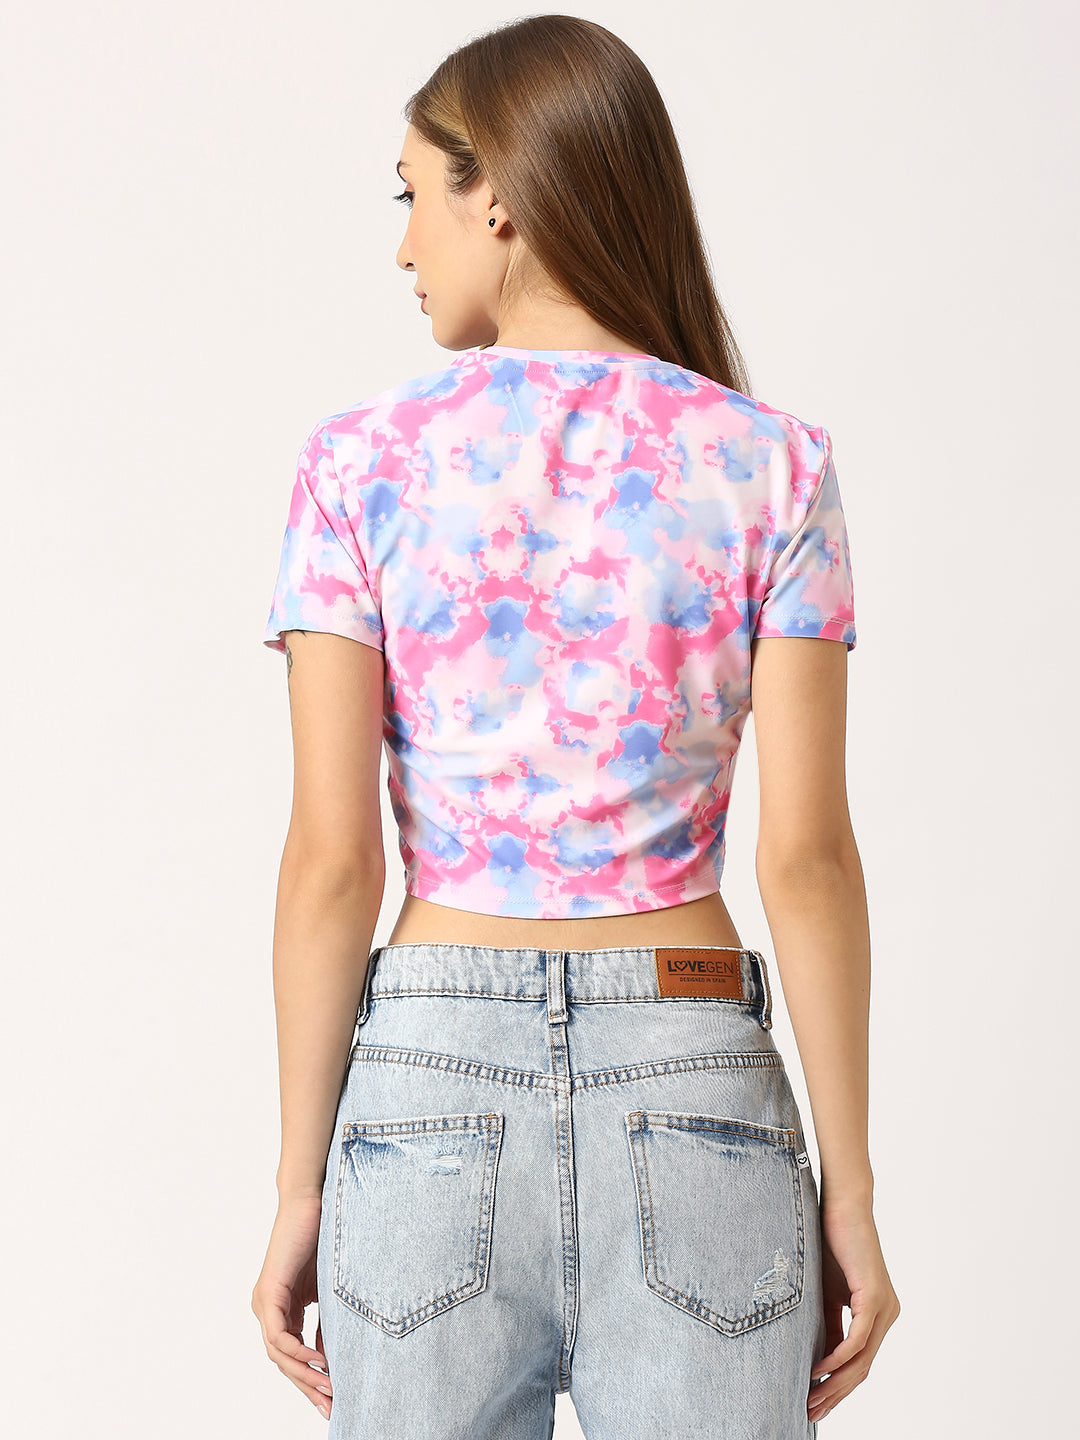 SNOW ROUND NECK SHORT SLEEVE FITTED CROP TOP